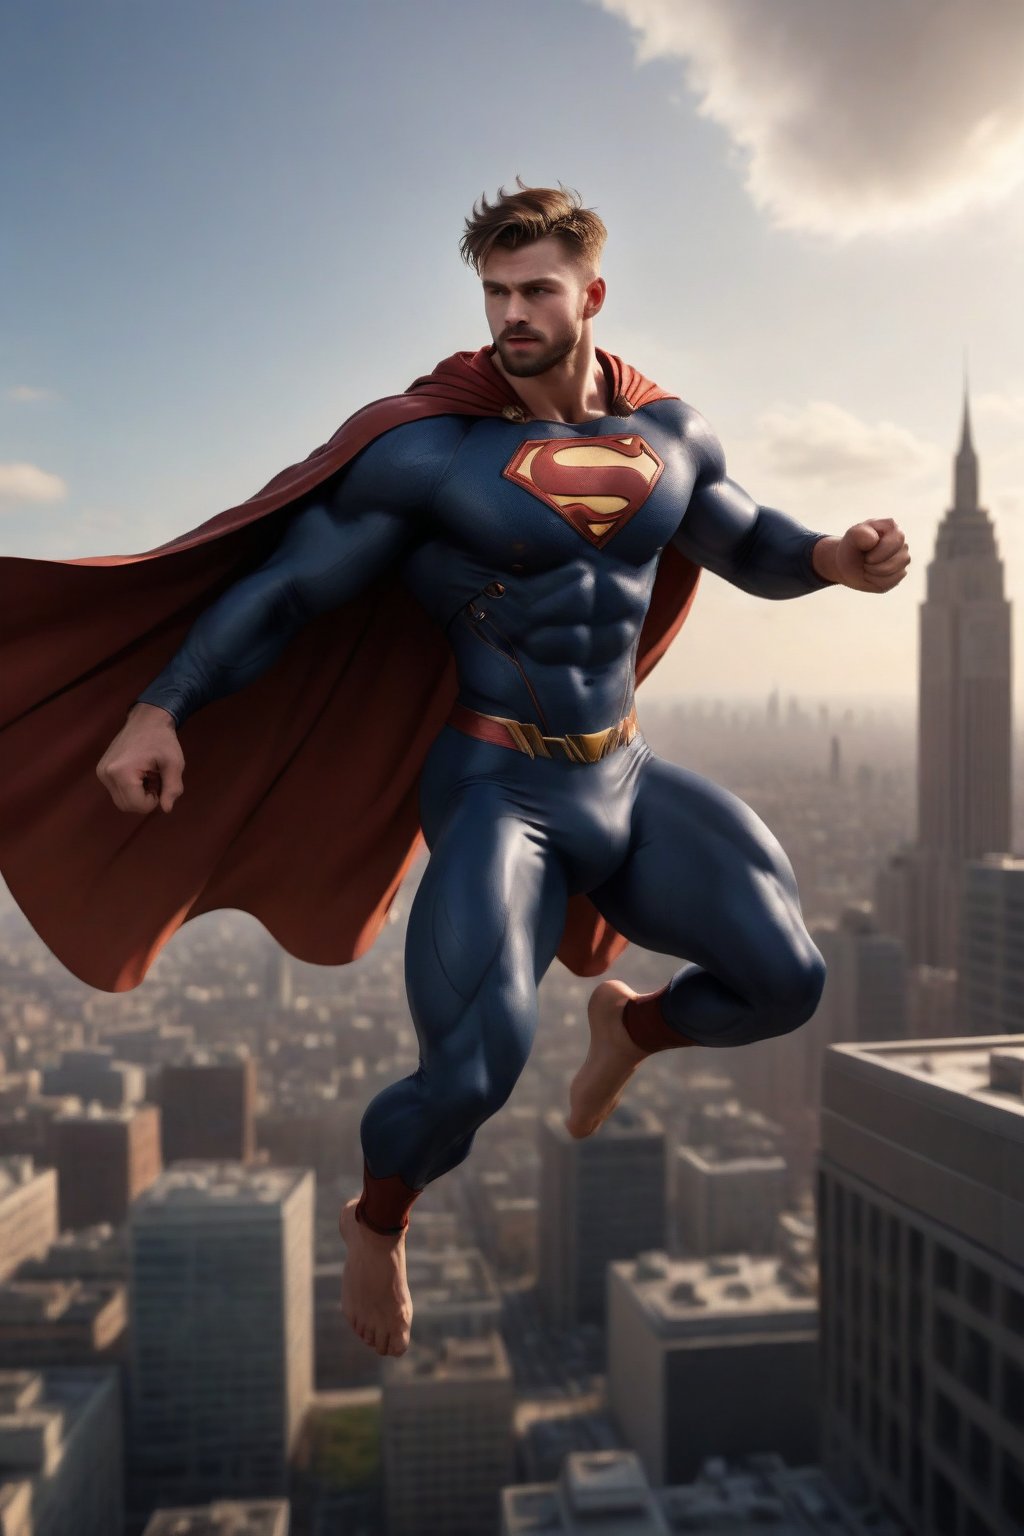 Jaeggernawt, a 27-year-old Englishman, soars through the air with dynamic flair, his muscular physique evident beneath his cape. Brown short hair and facial hair are tousled by wind as he gazes upwards, his eyes fixed on some distant goal. The side camera view frames him majestically against a blurred cityscape and zenith, bathed in dramatic backlighting that accentuates his heroic pose. Special effects render the scene with cinematic panache, imbuing the image with vibrant color and realistic texture.